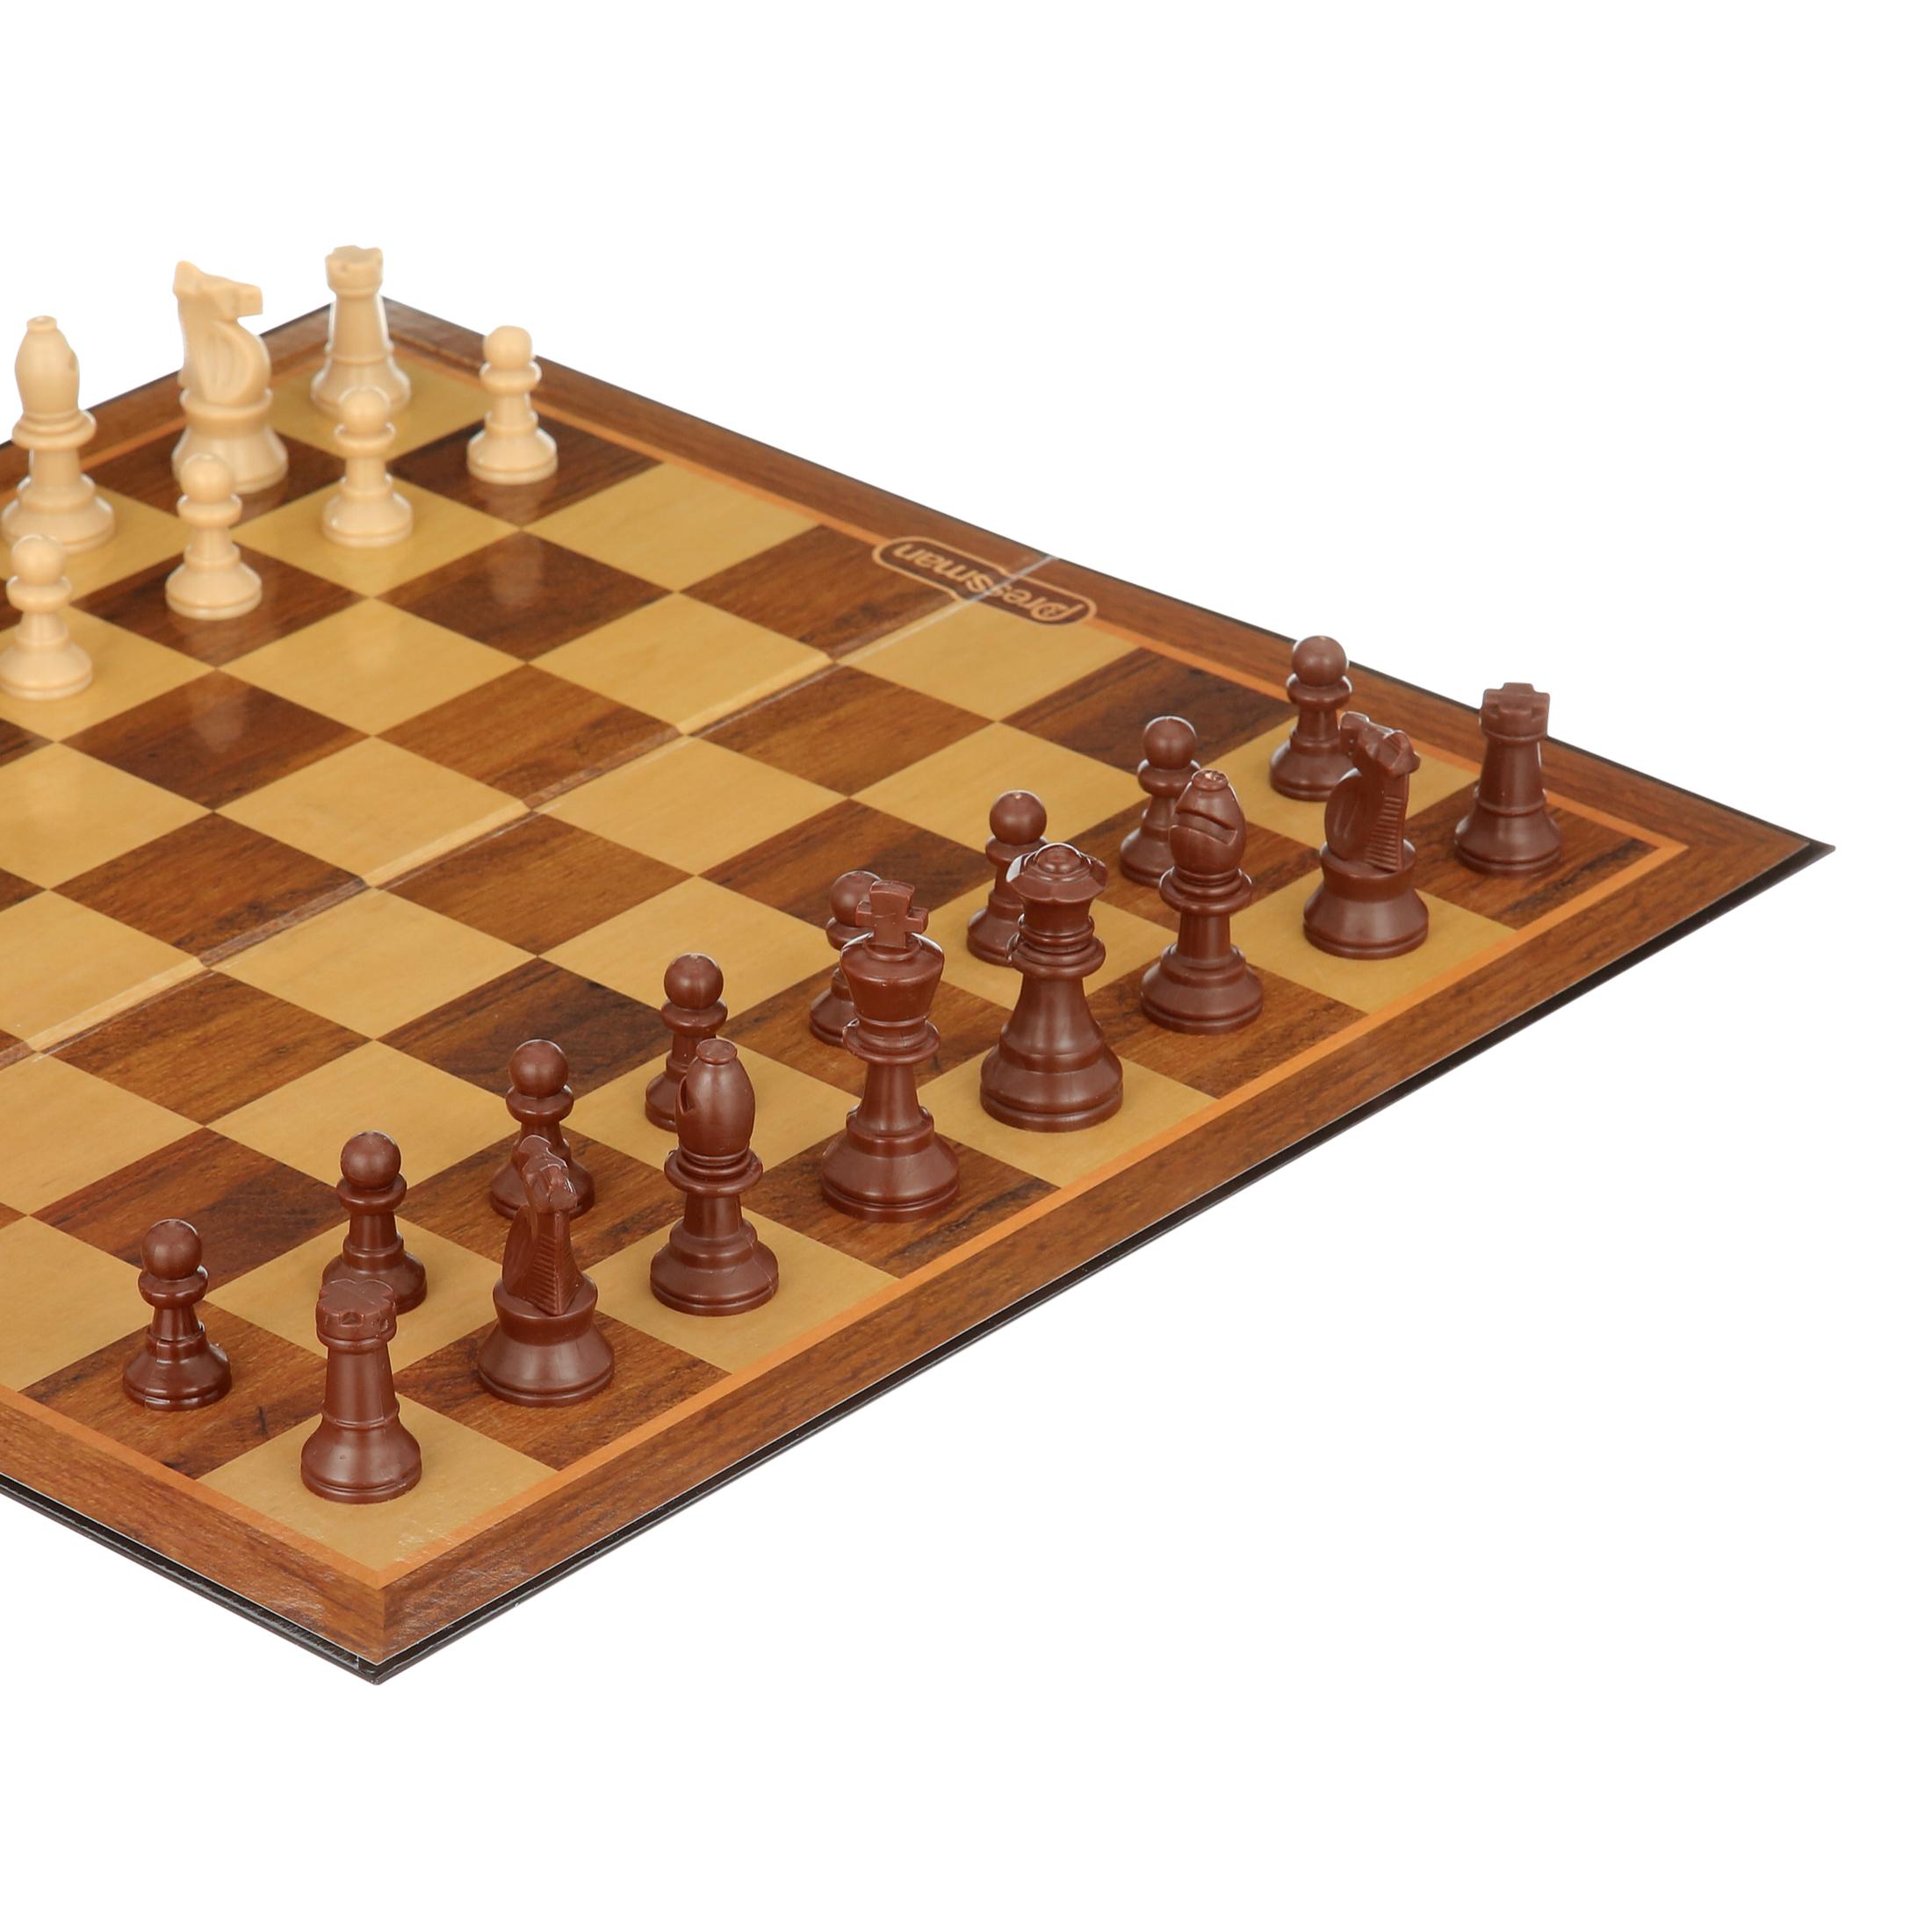 Pressman Toys - Family Classics Chess With Folding Board and Full Size Chess Pieces - image 5 of 6